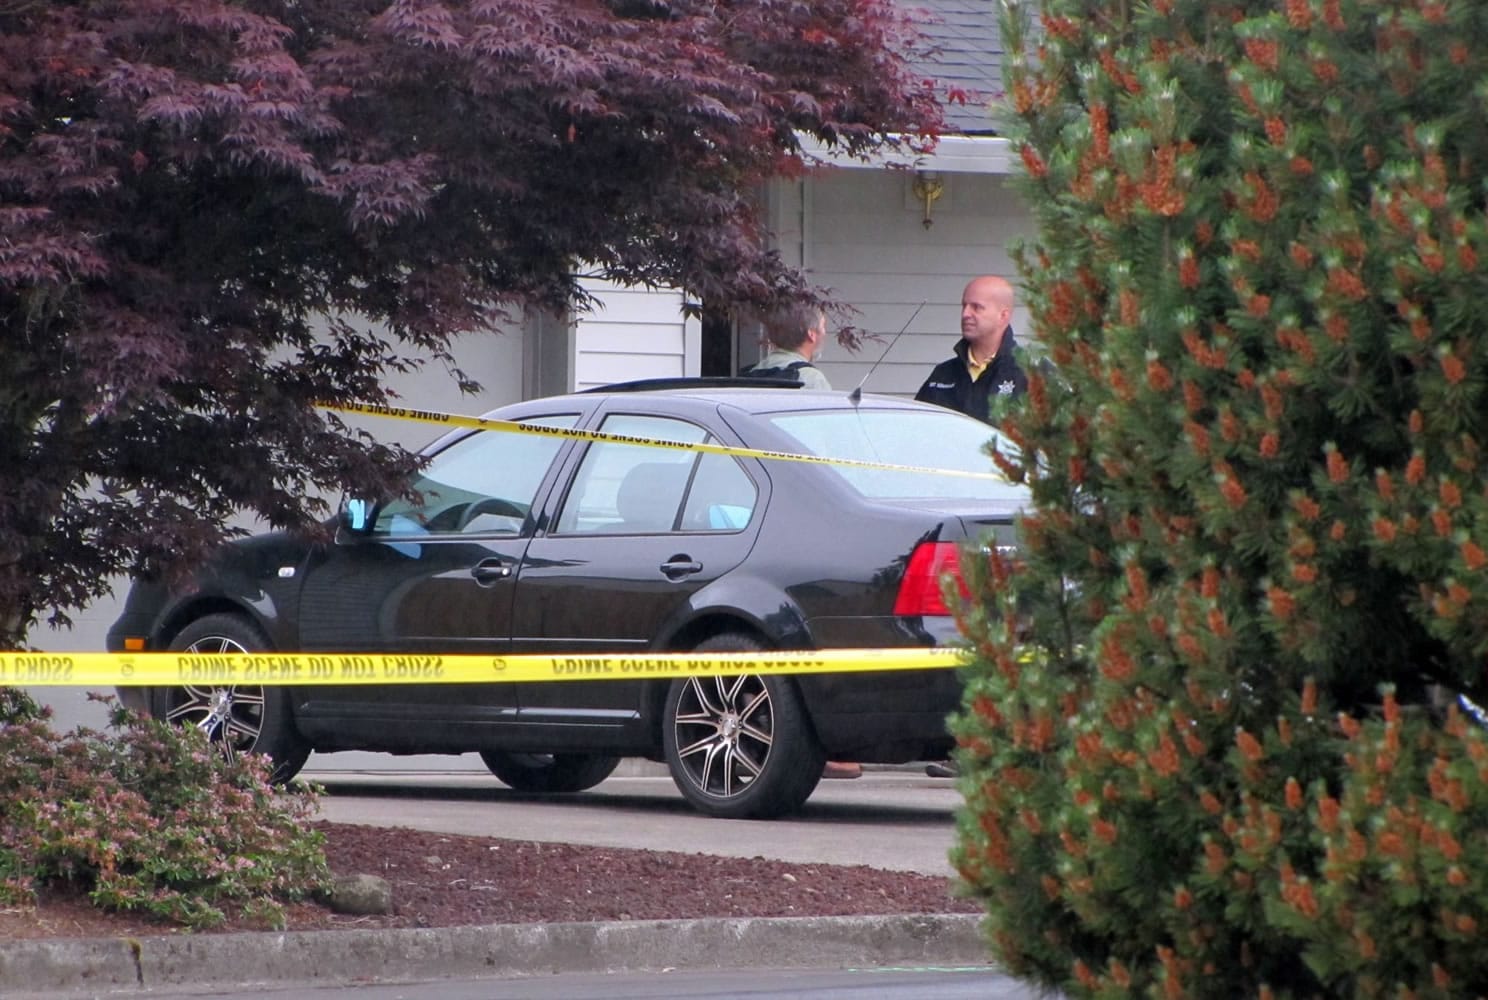 Sheriff's deputies talk in front of a home near the intersection of Northeast 101st Avenue and 72nd Circle in the Sunnyside neighborhood, north of Vancouver, after a shooting Tuesday morning.